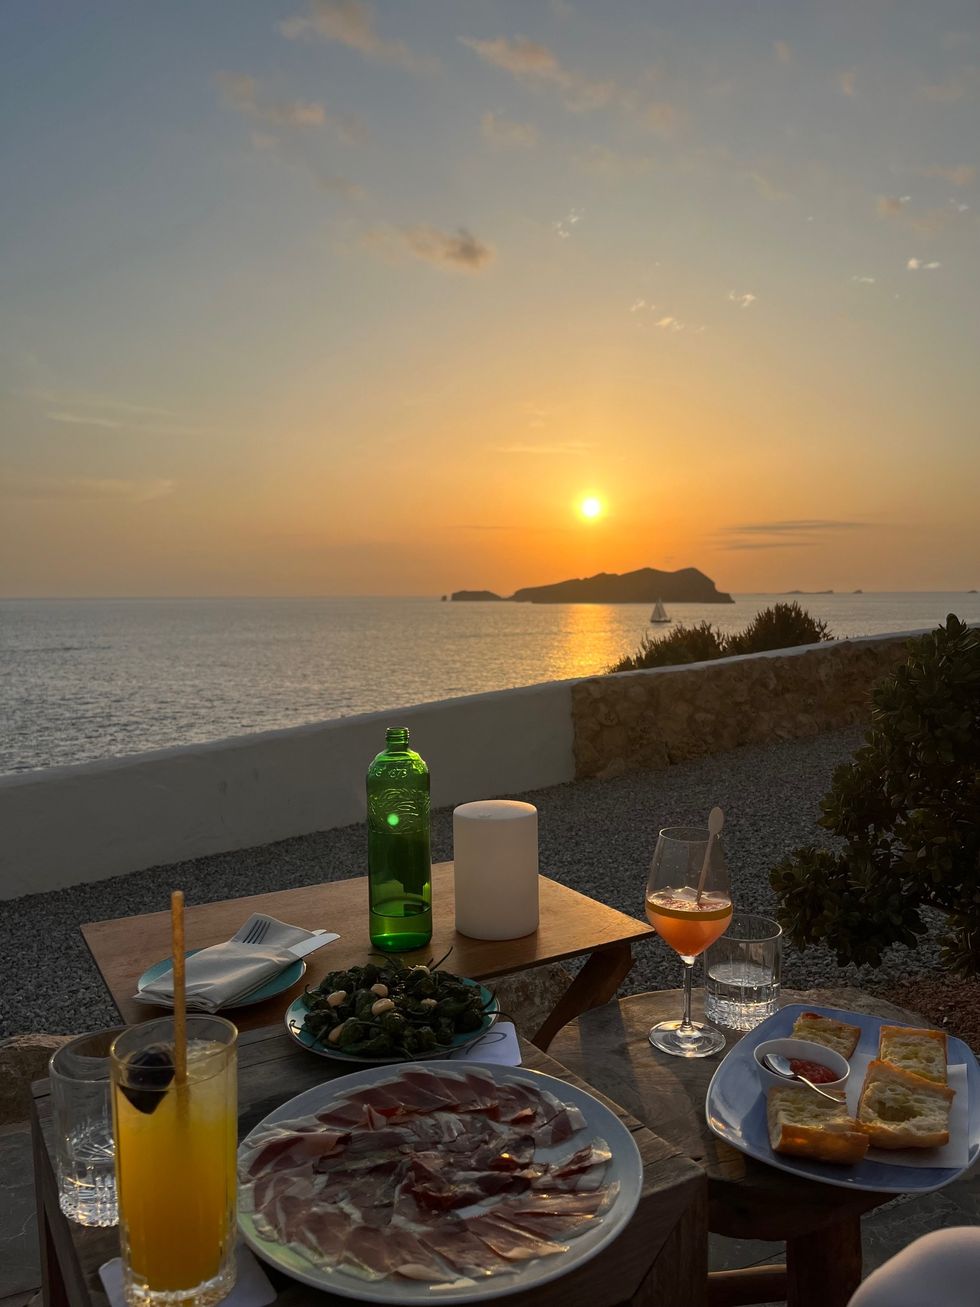 ibiza guide what to eat and where to stay in the south of the island and inland